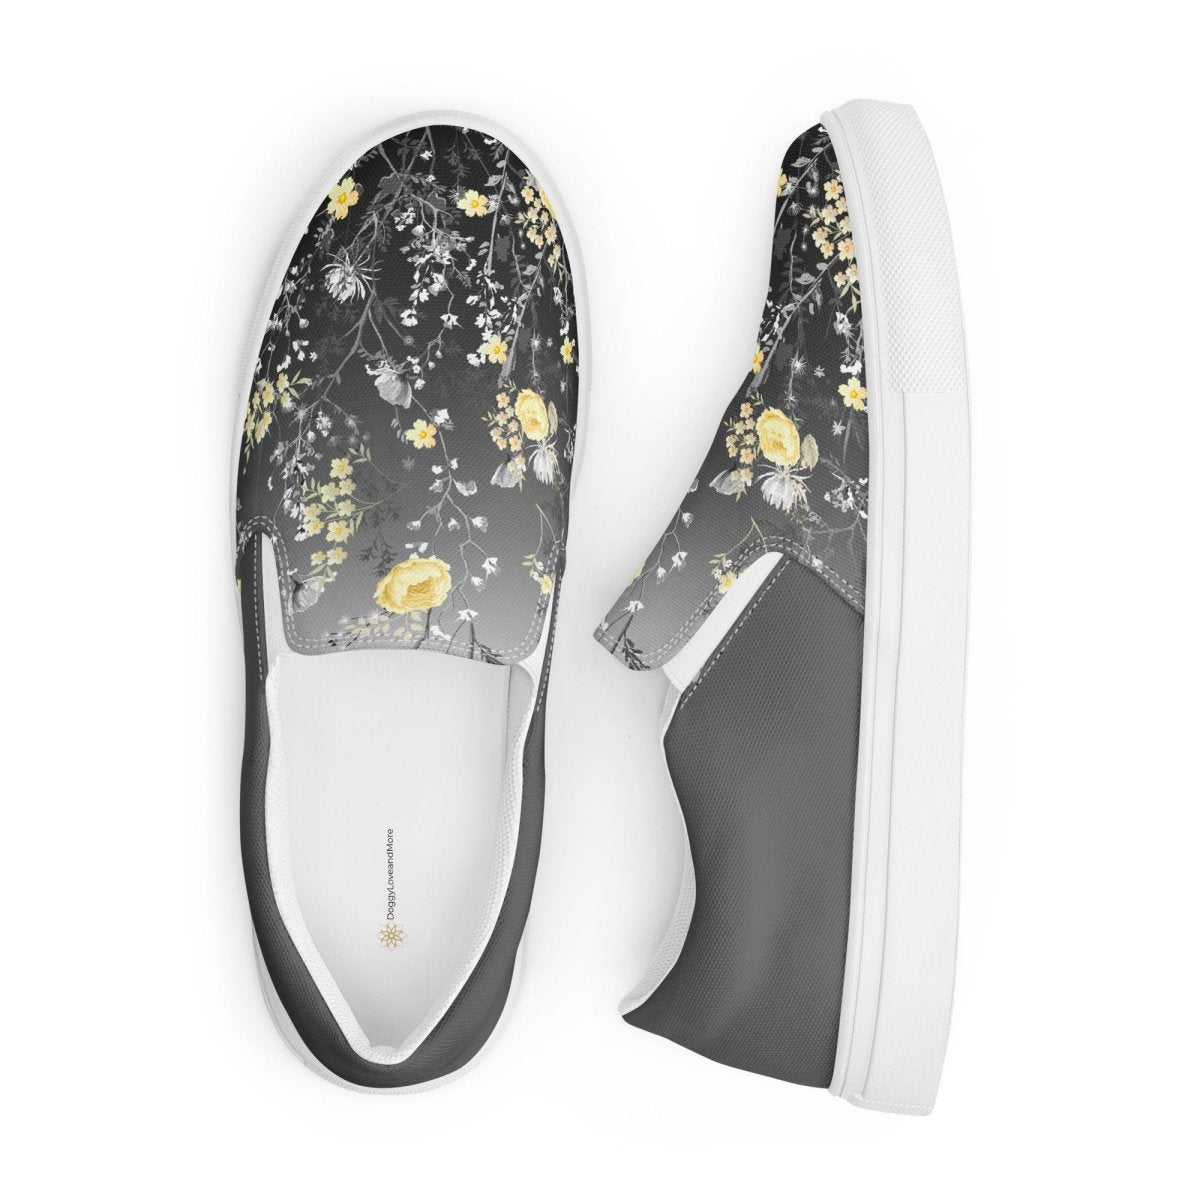 Grey Floral Slip-On Shoes - DoggyLoveandMore